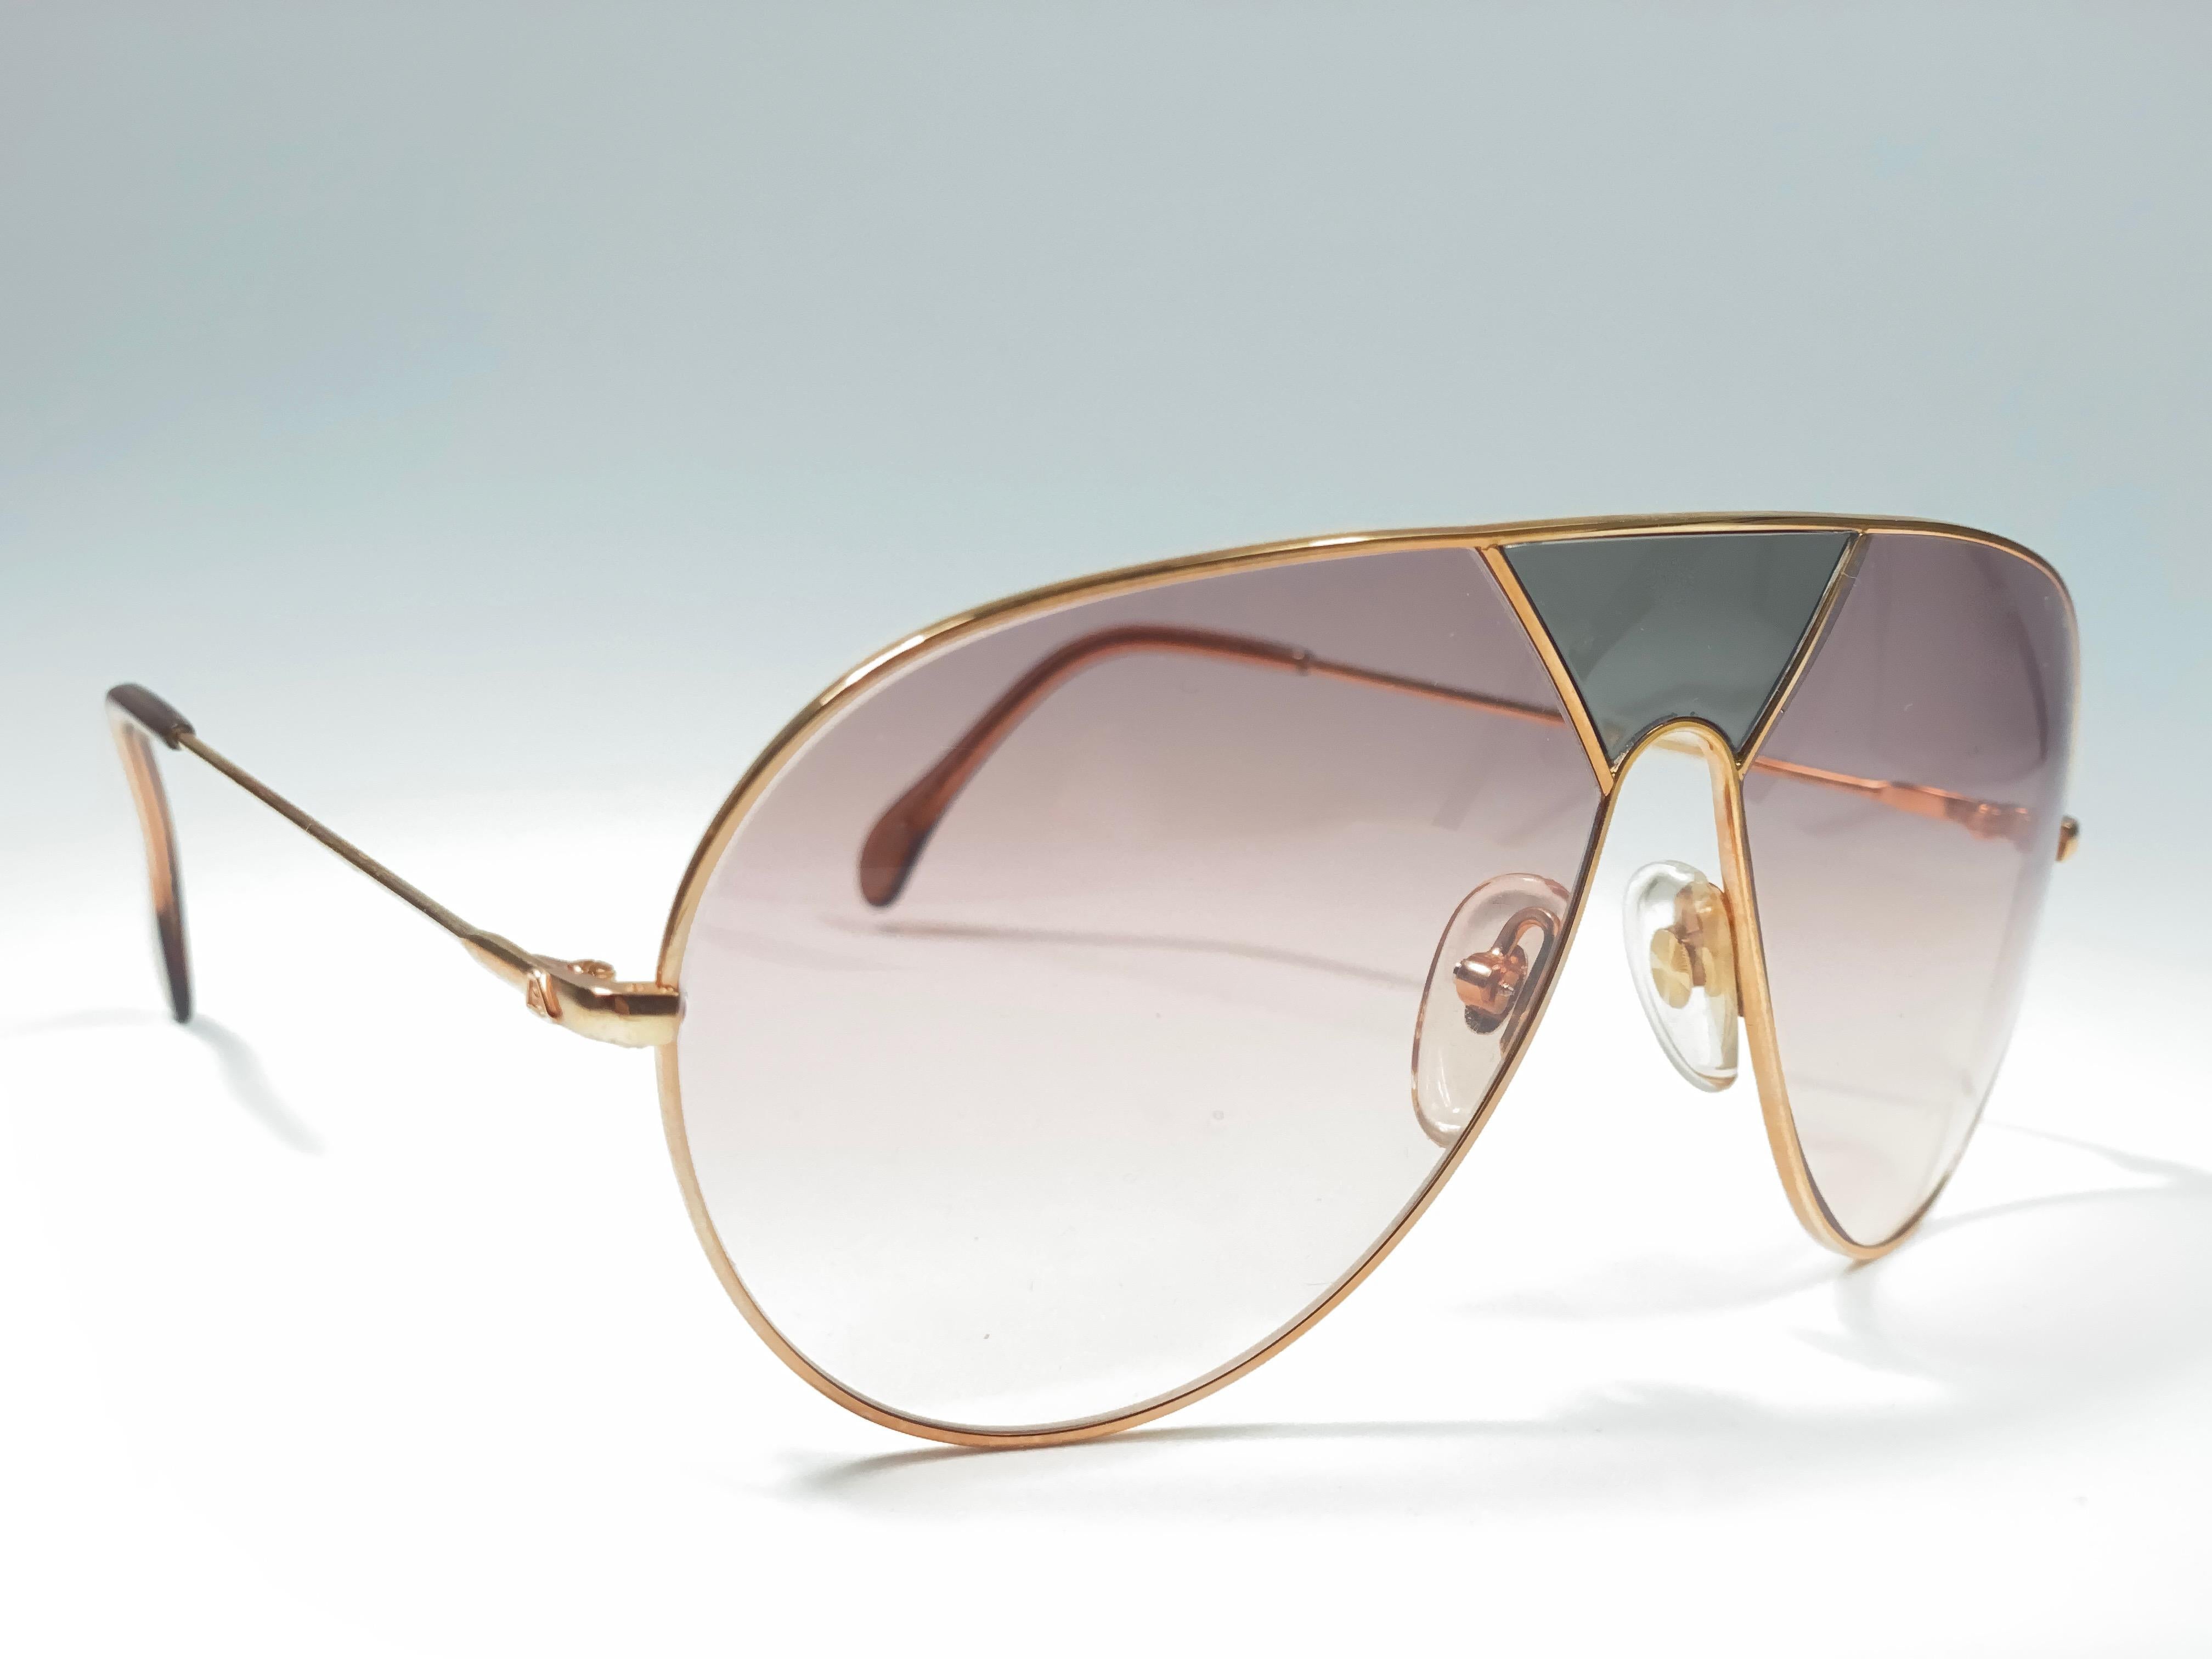 New Vintage Alpina TR3 Aviator Sunglasses. Gold frame with green insert and candy pink lenses.
This pair has a minor sign of wear due to storage.
Made in West Germany.